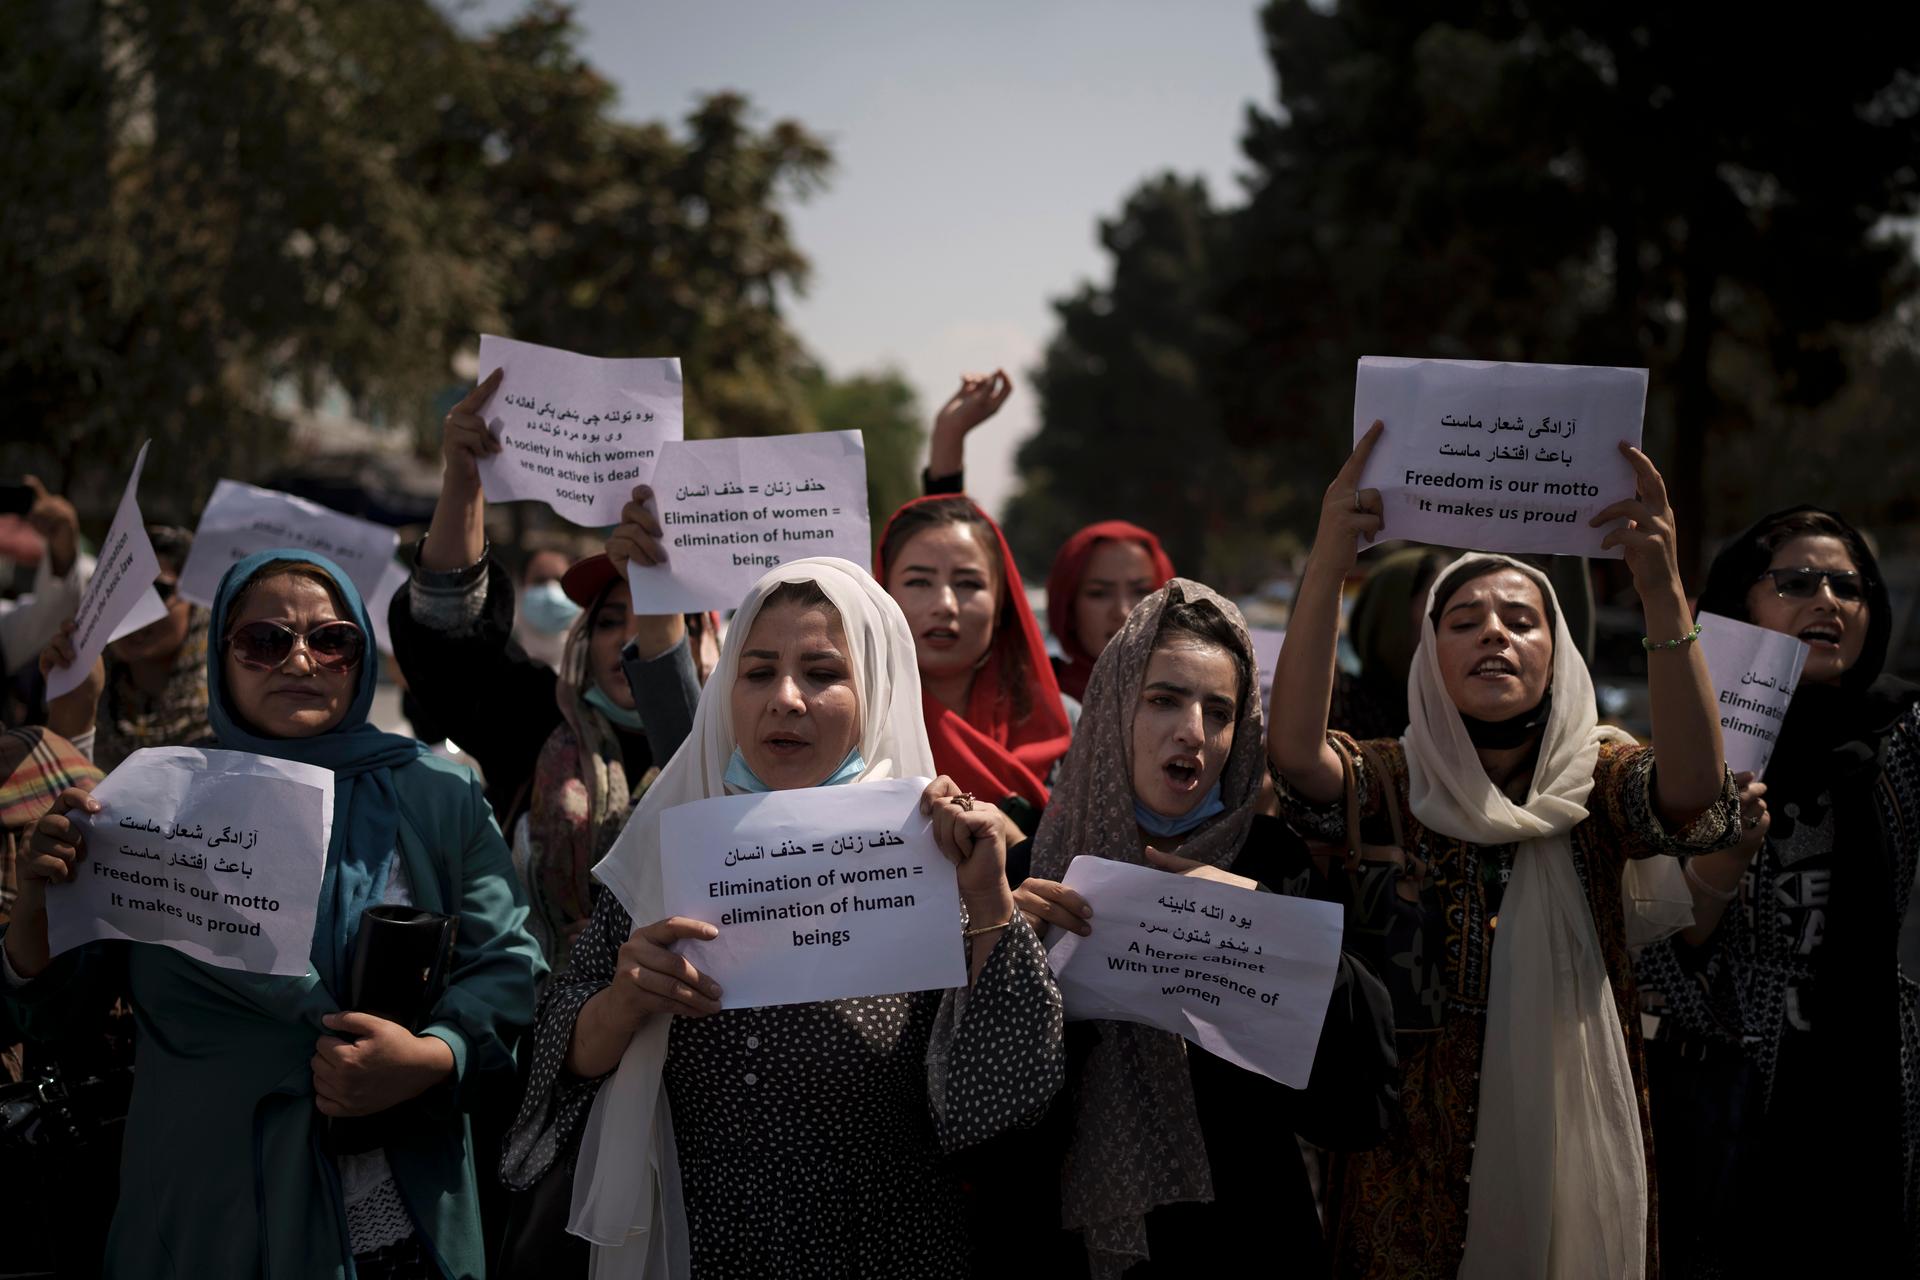 Afghan women march and hold signs in rally